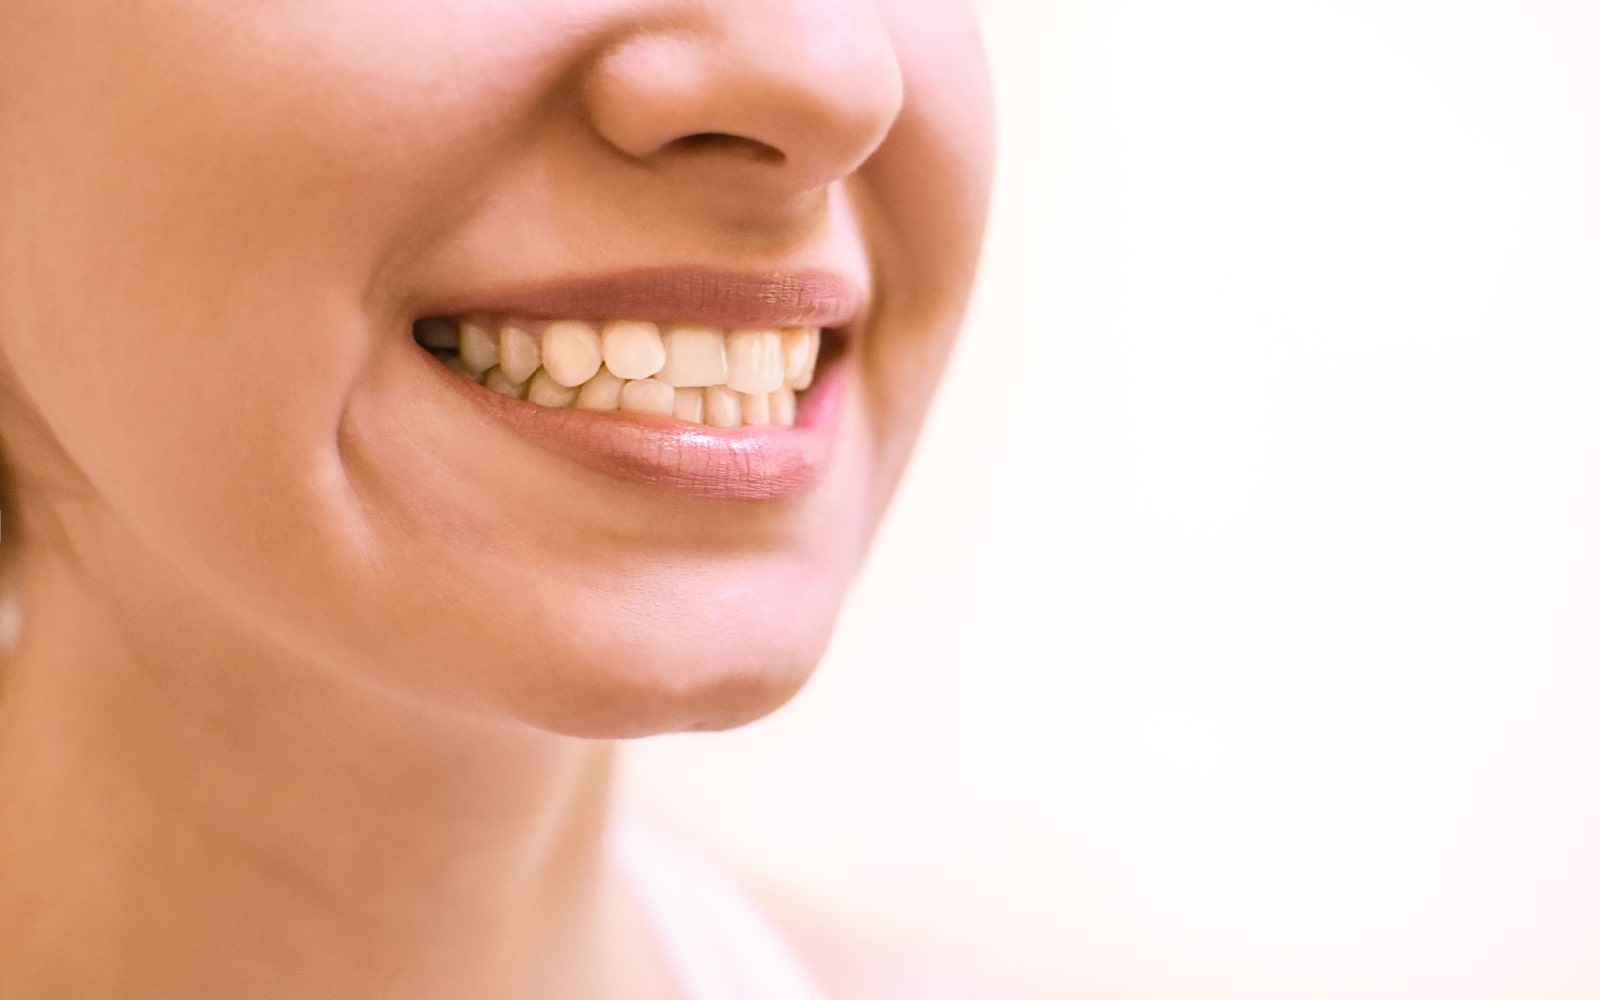 Woman Smiling with Imperfect Teeth